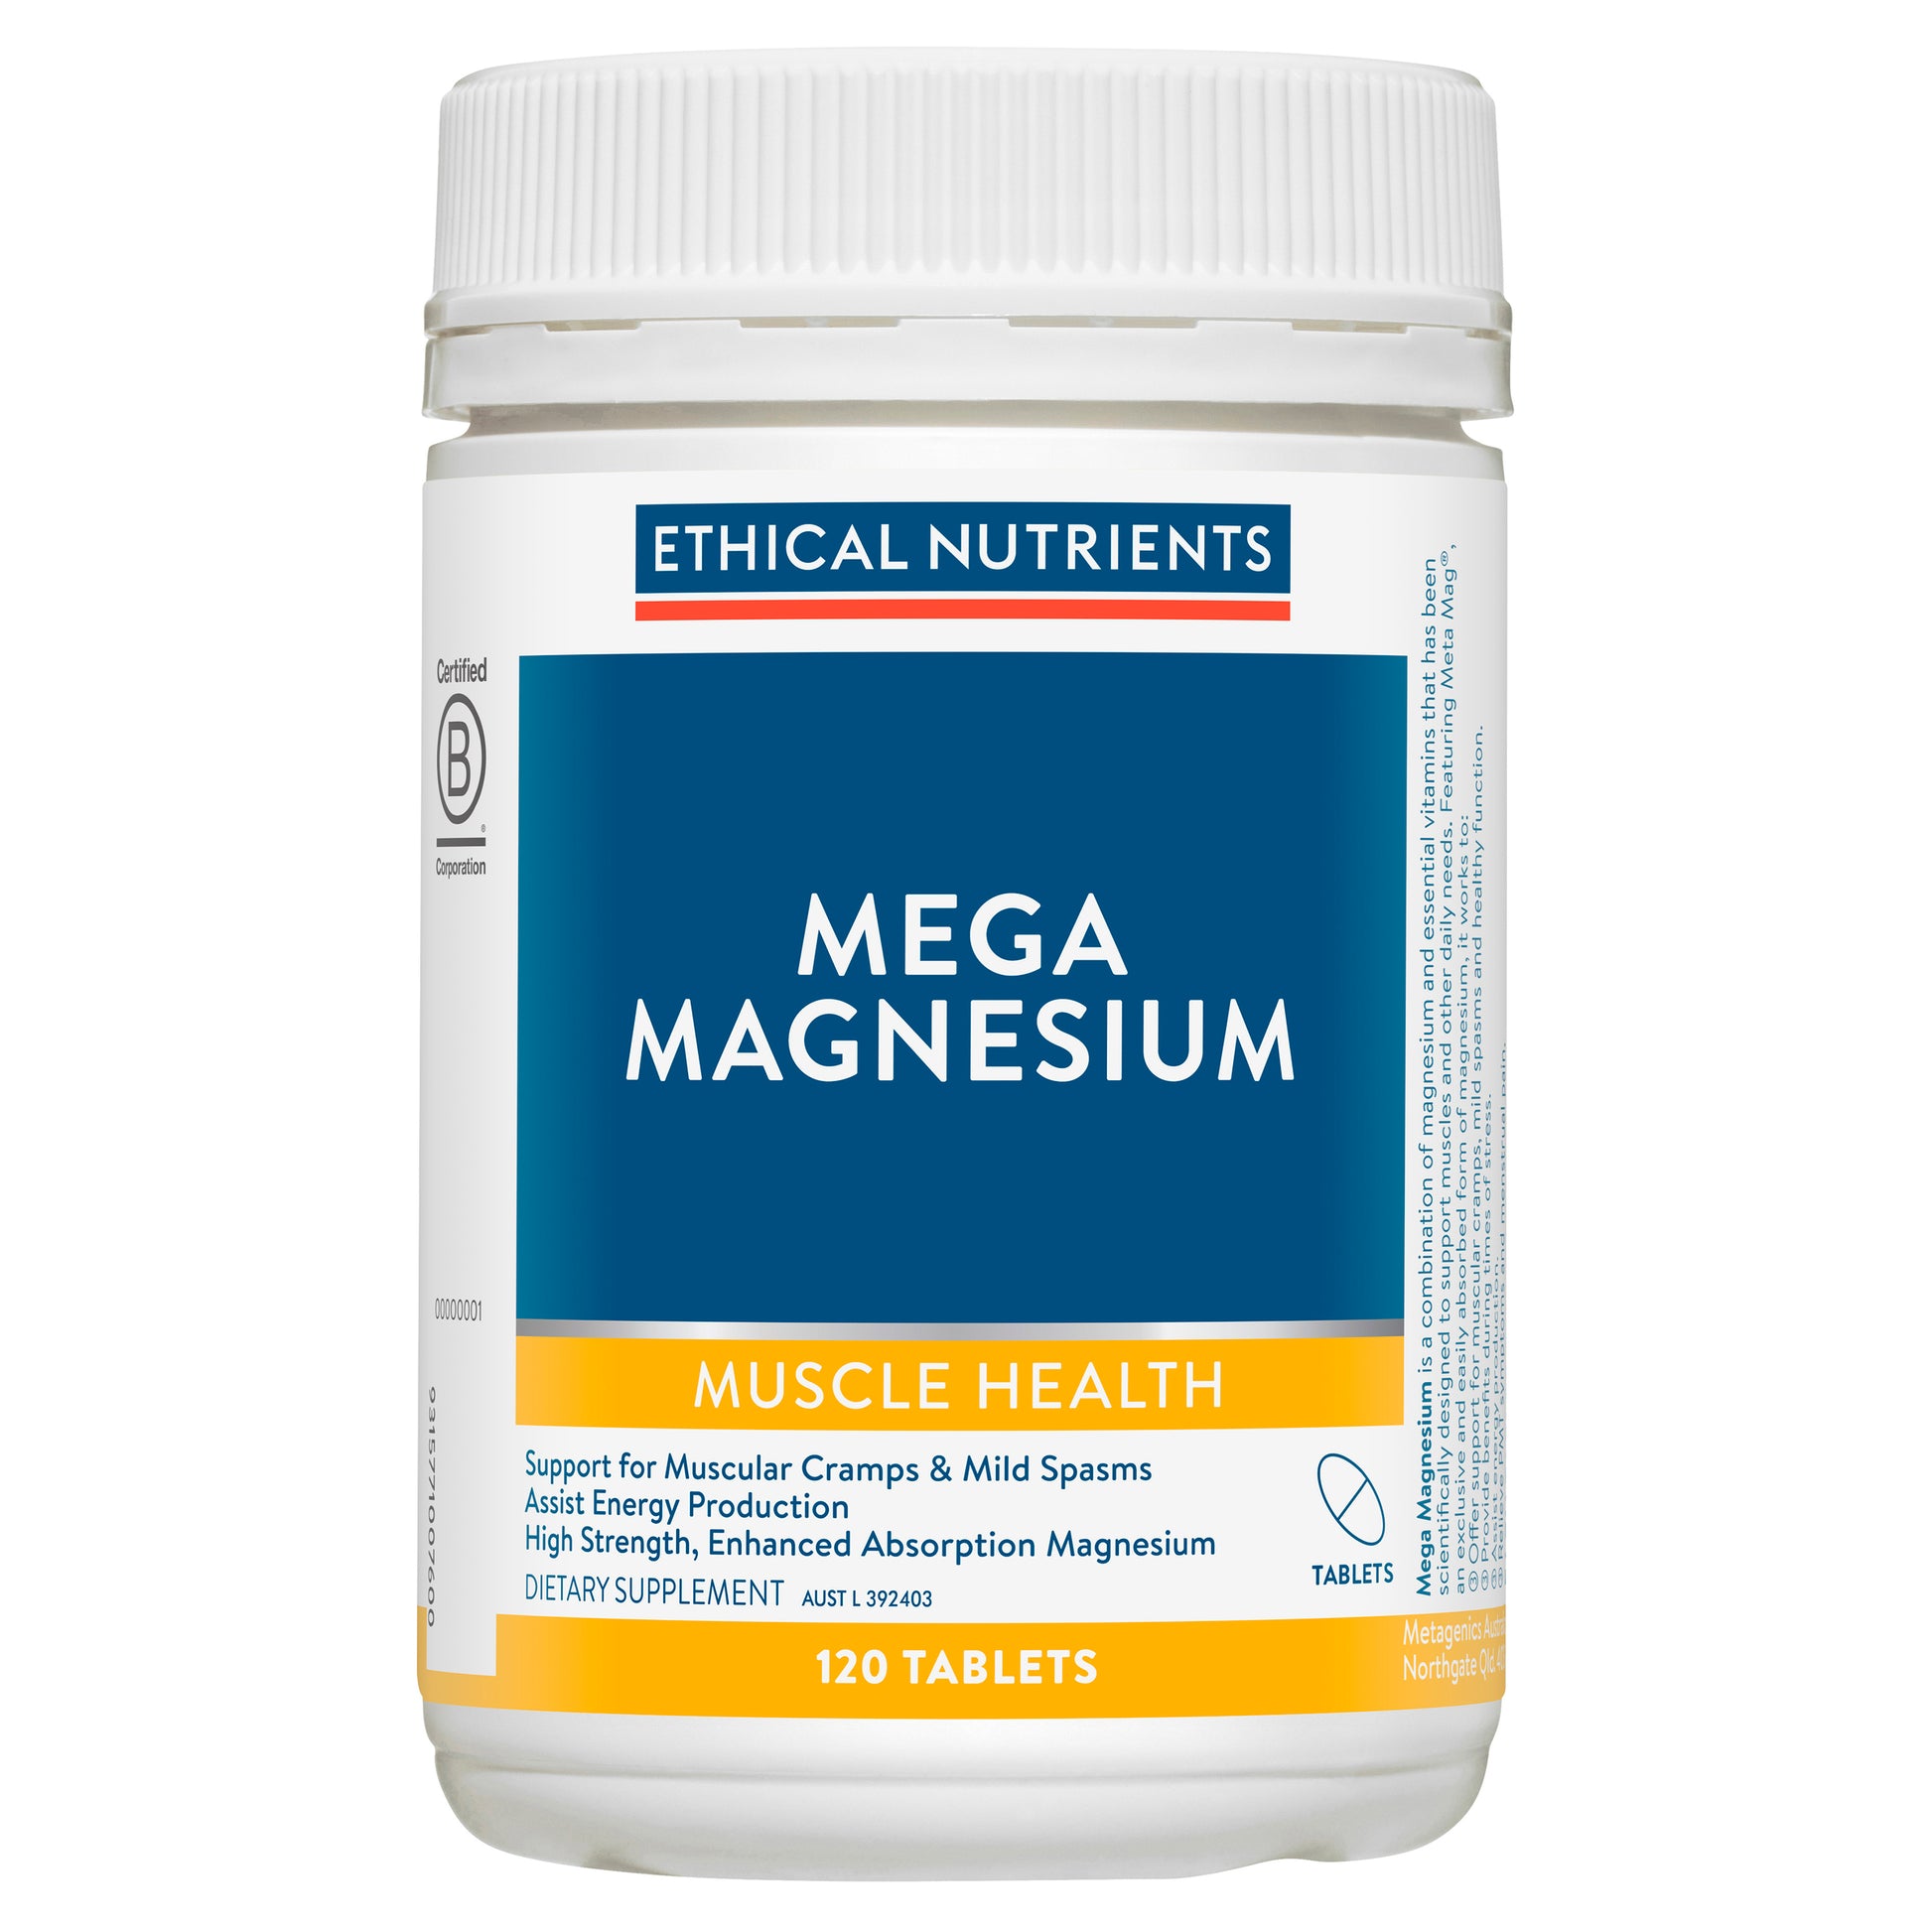 Ethical Nutrients Mega Magnesium 120 Tablets #size_120 tablets